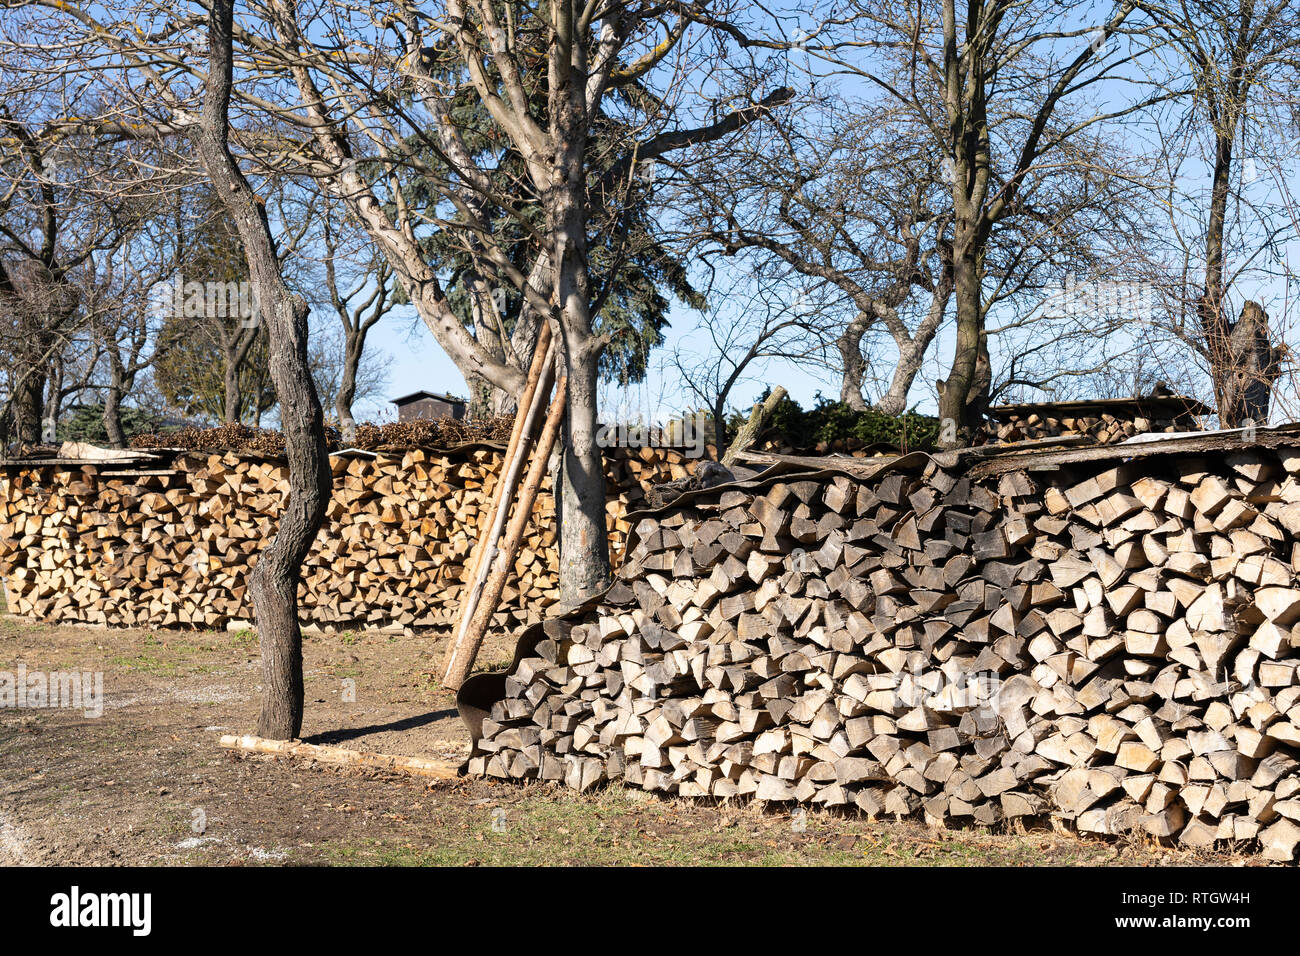 Stacked chopped firewood and kindling for domestic use during winter time in Lower Austria Stock Photo